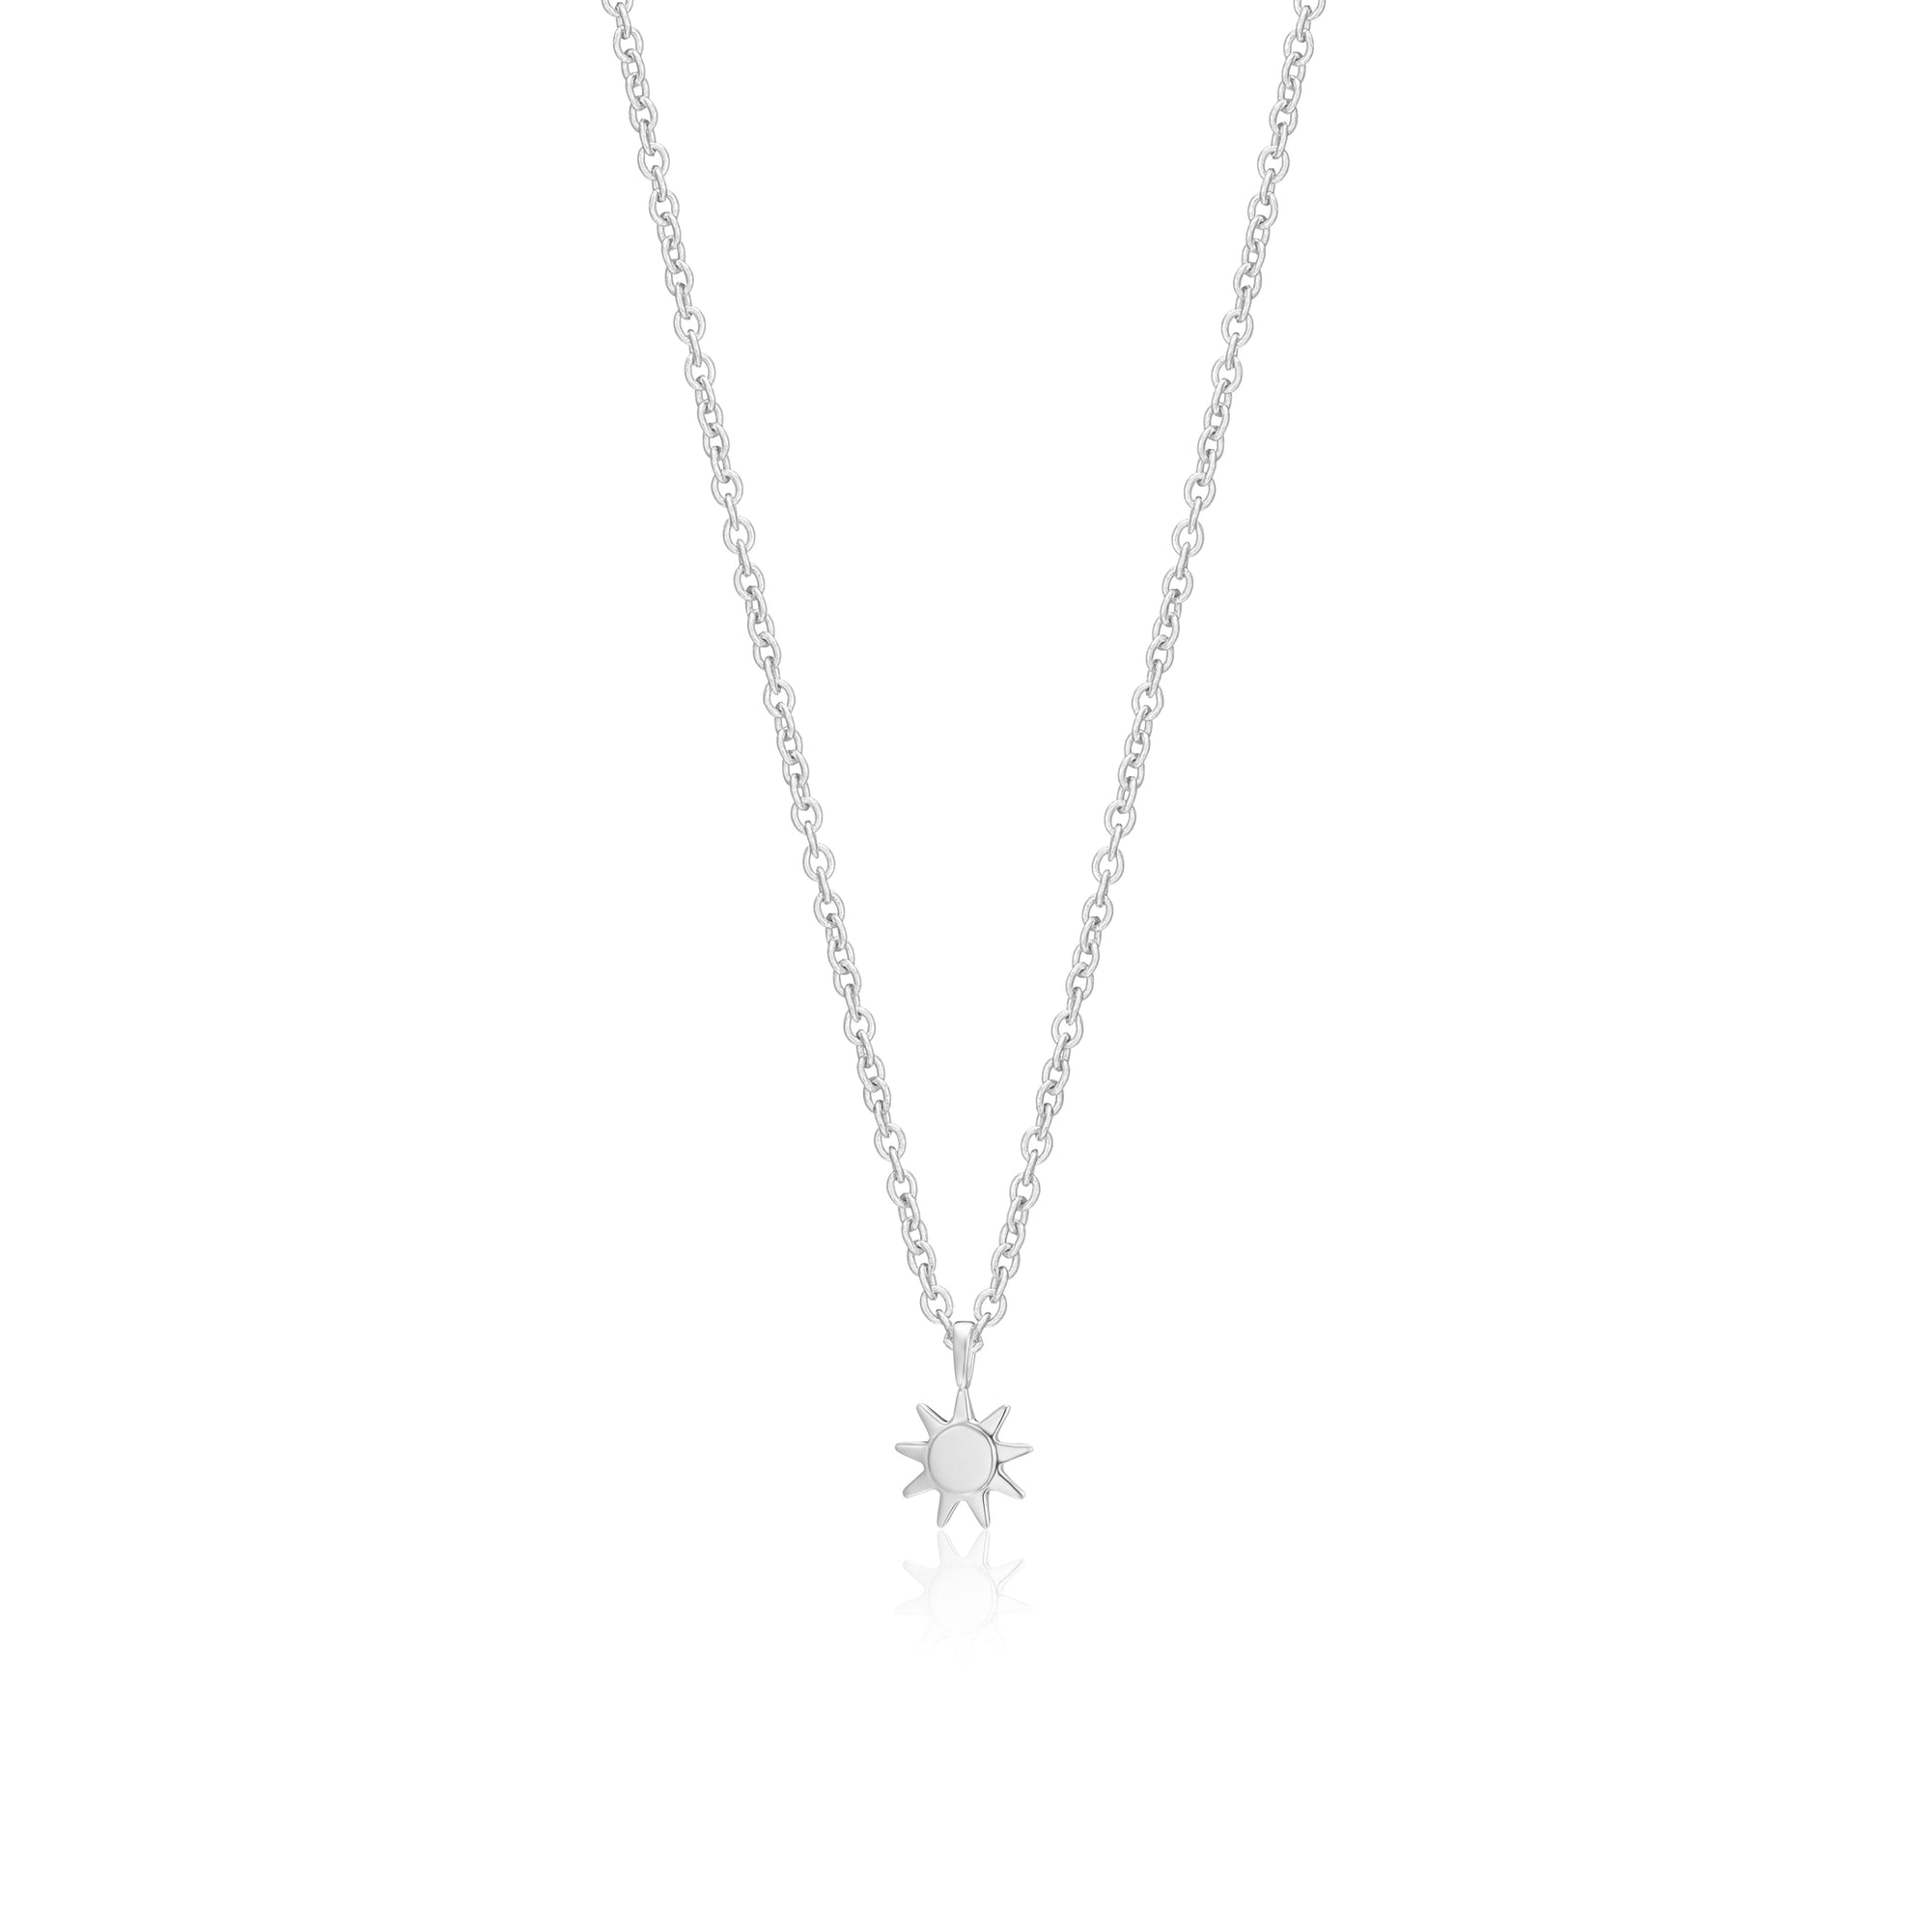 You Are My Sunshine Charm Necklace - Tiny